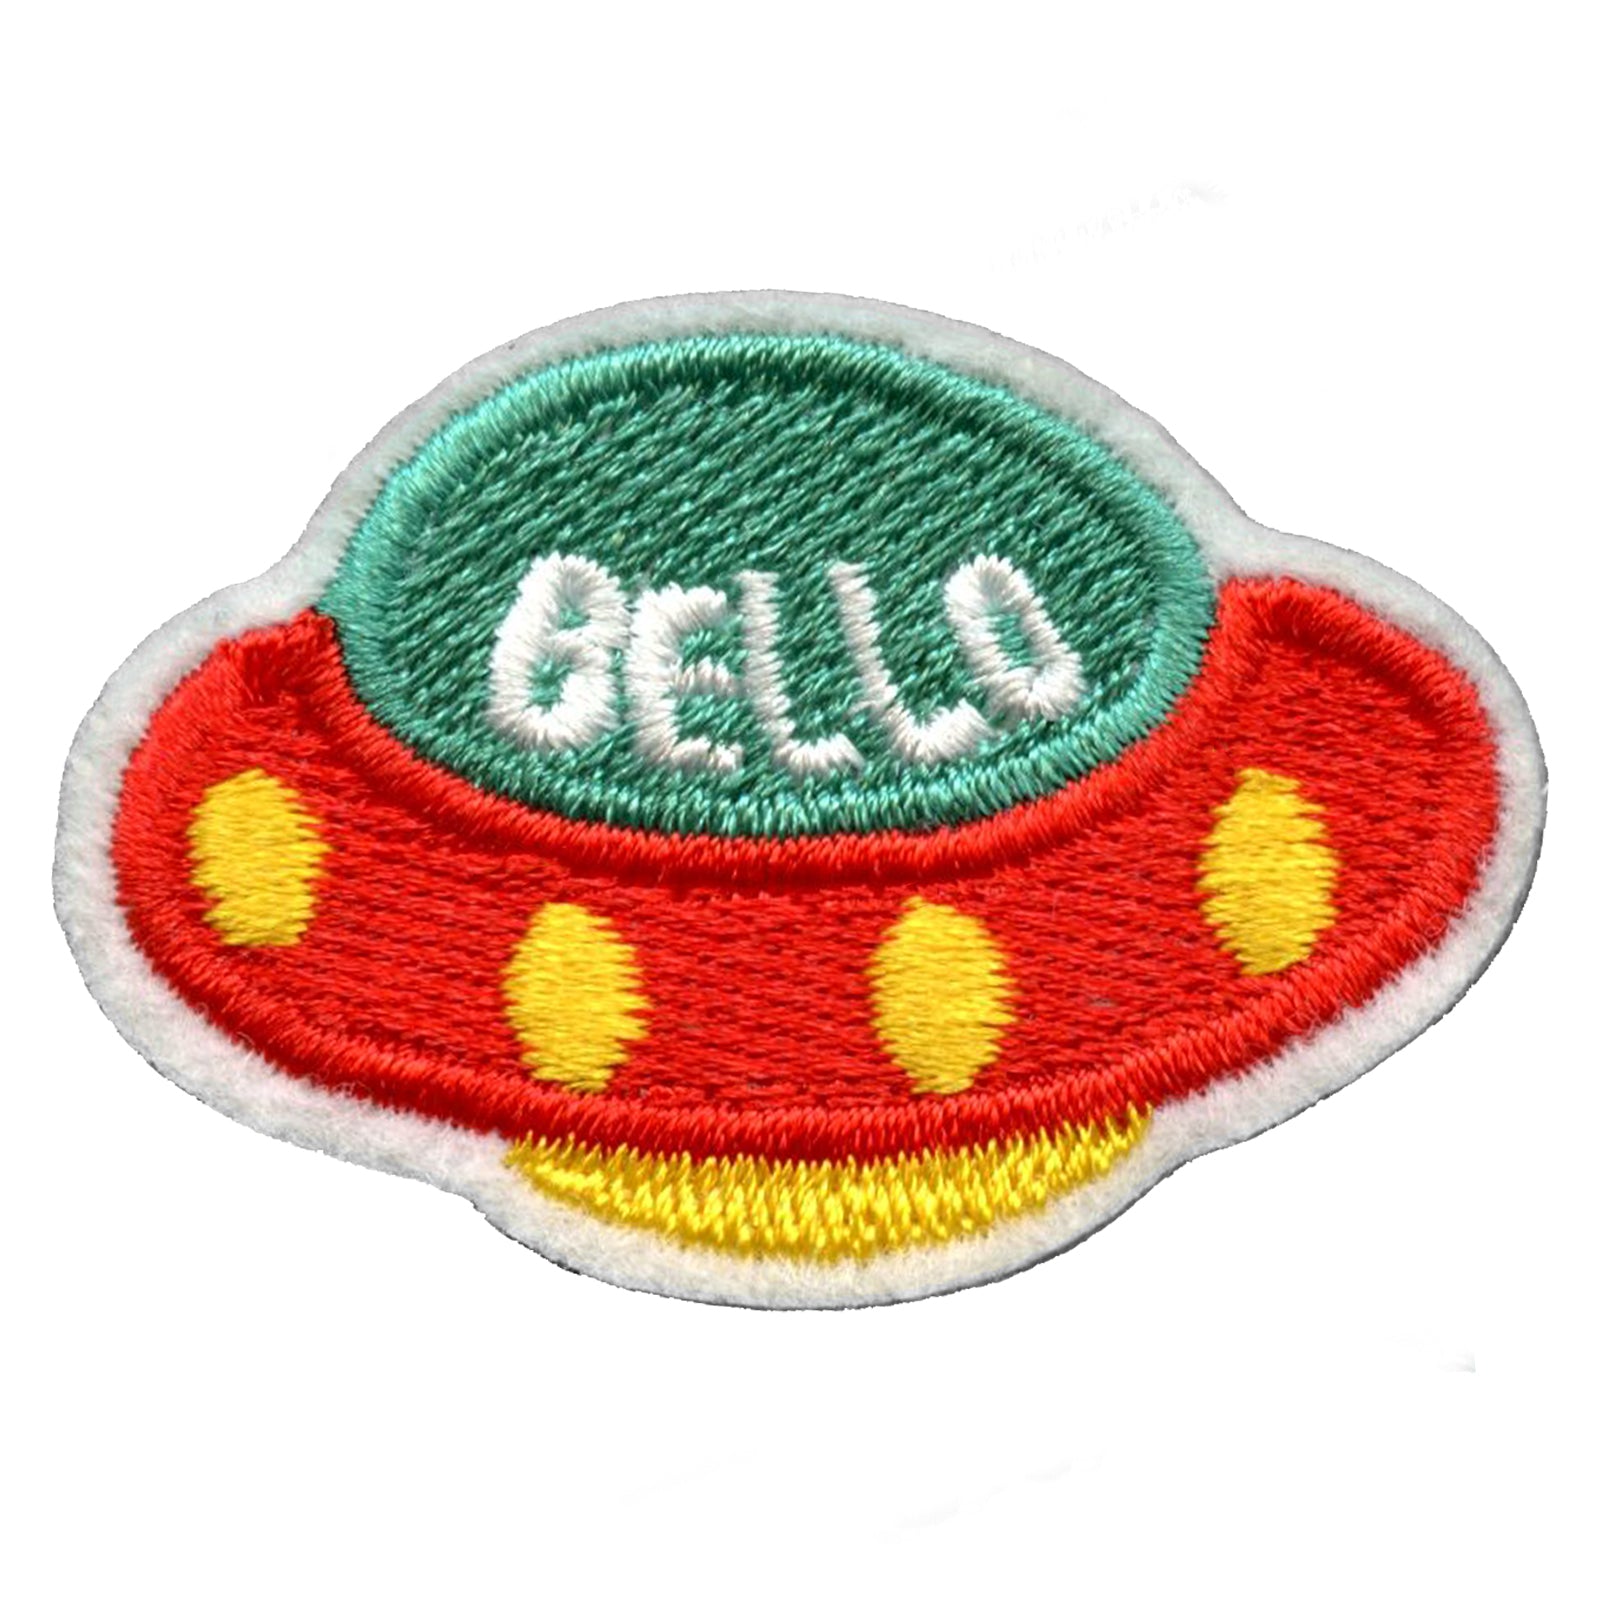 Space Ship With Bello Script Embroidered Iron on Patch 